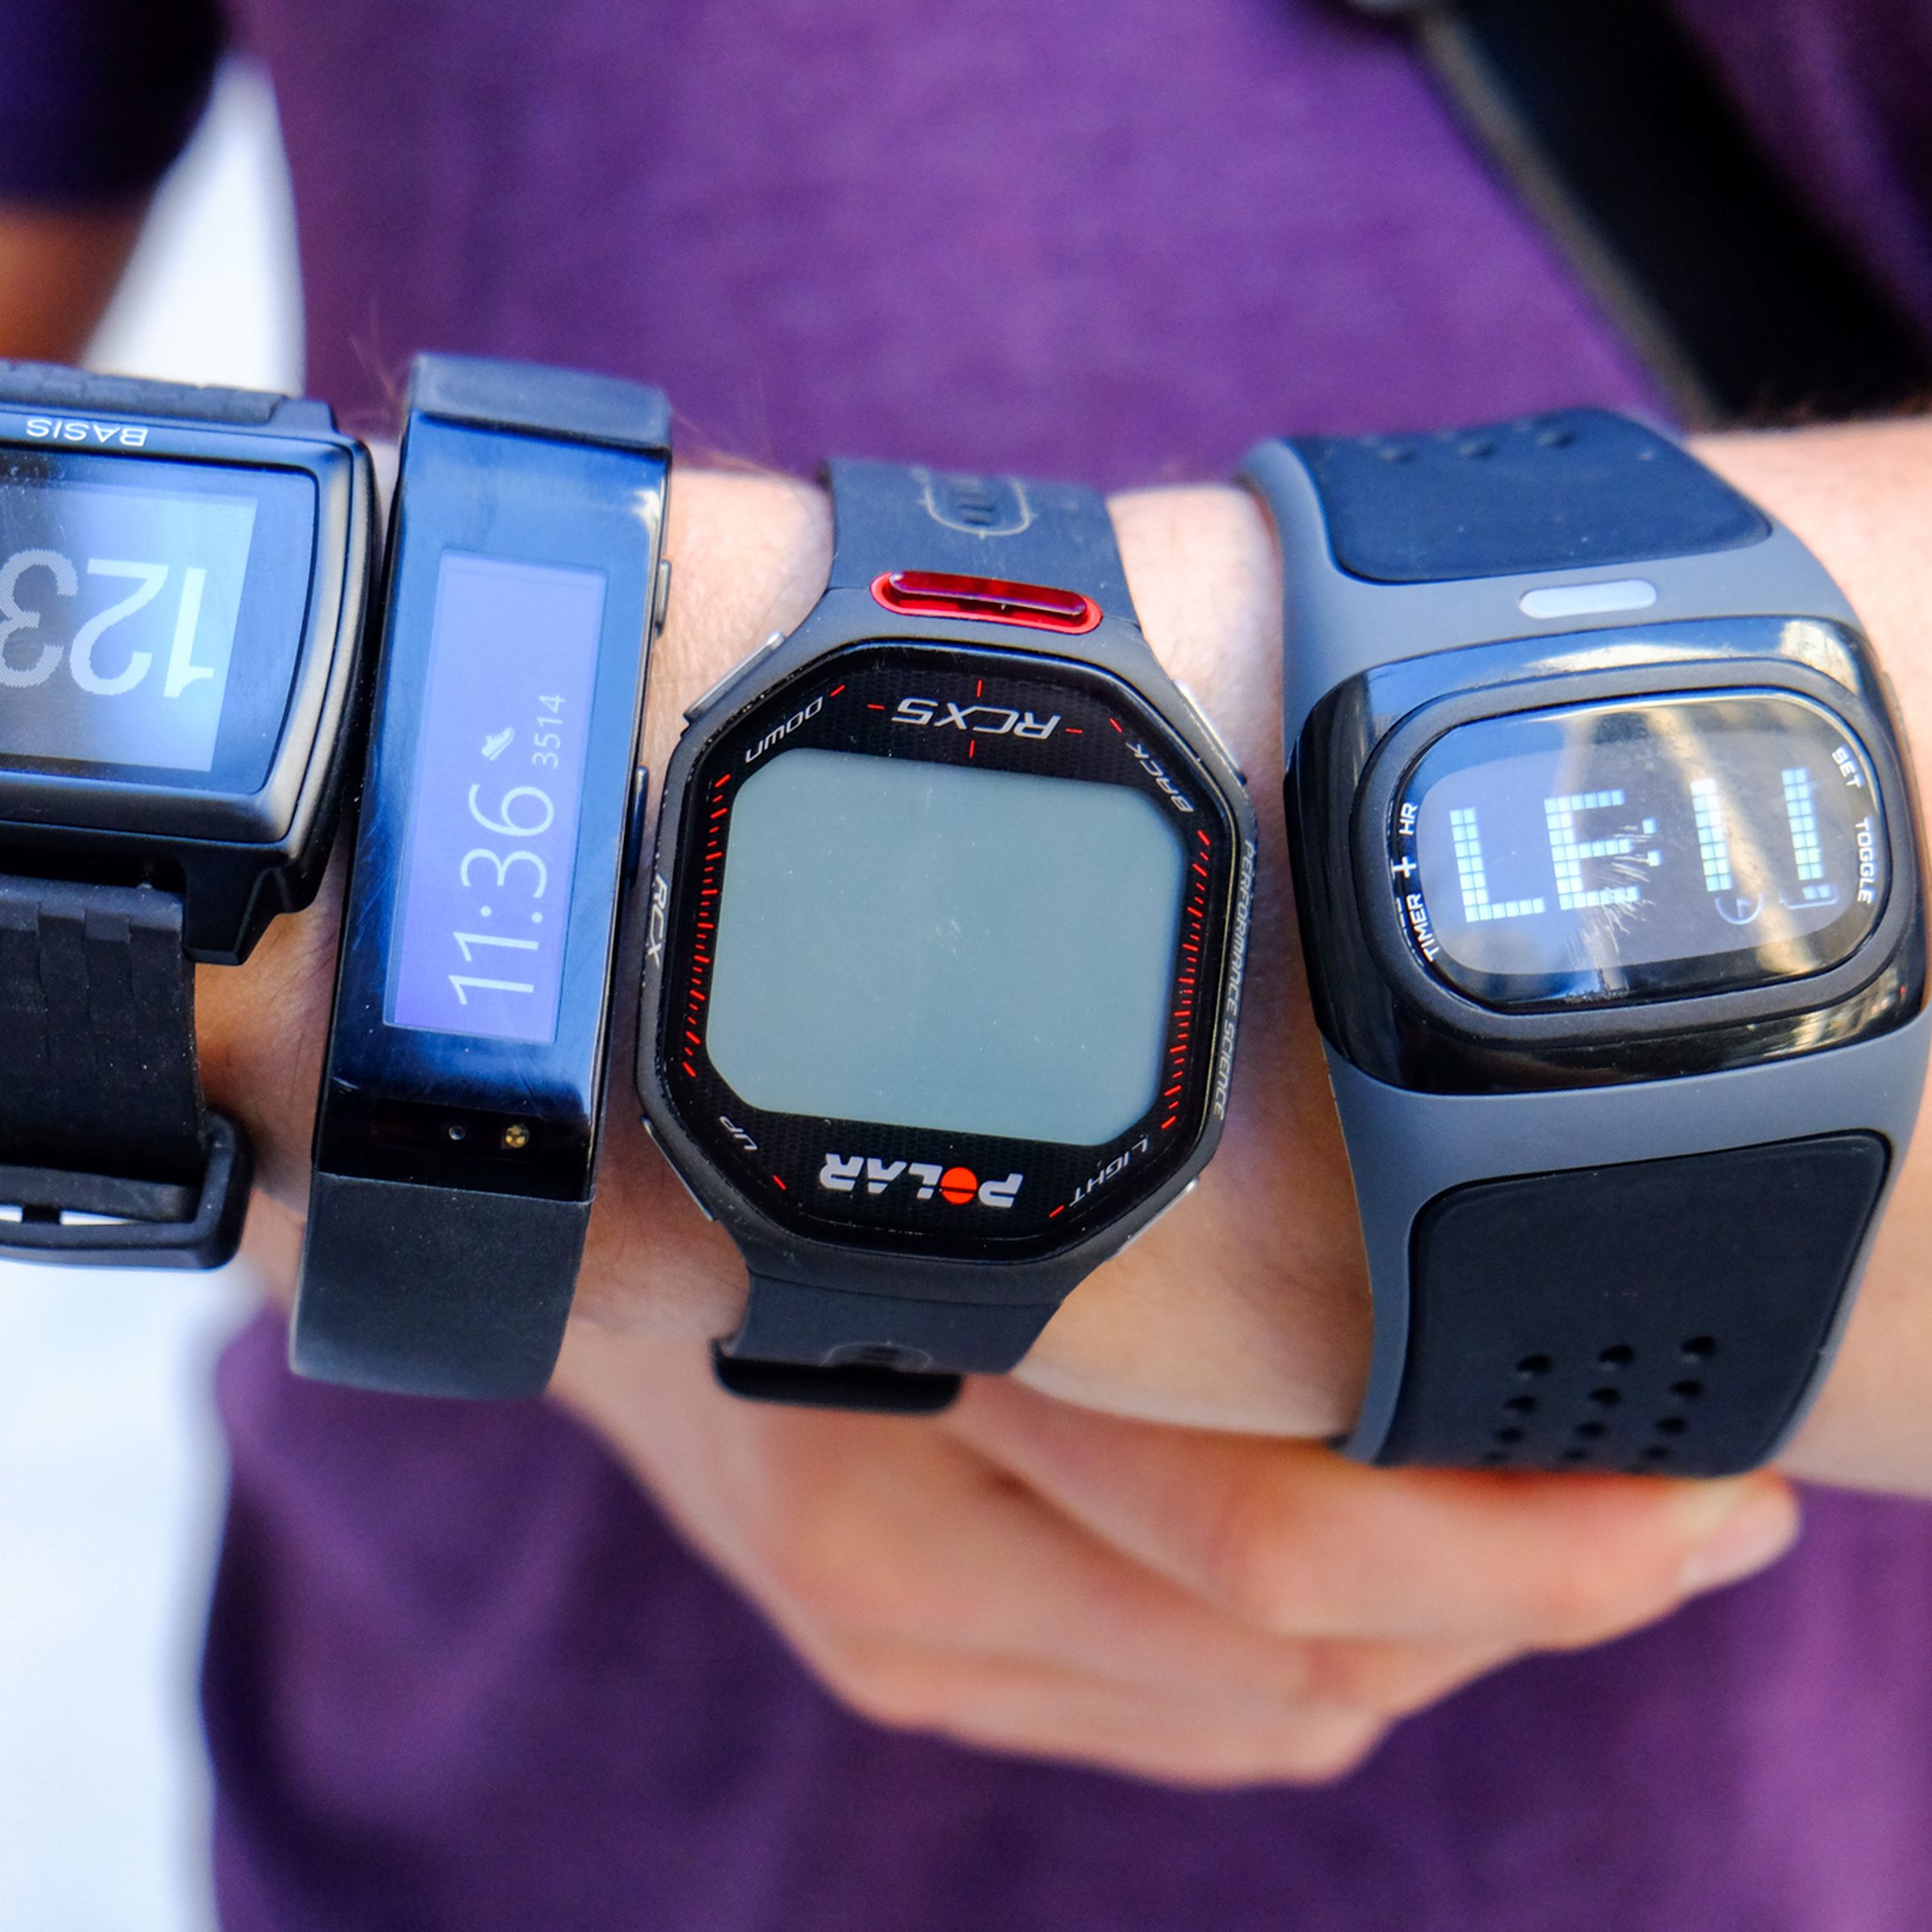 Fitness trackers for workouts